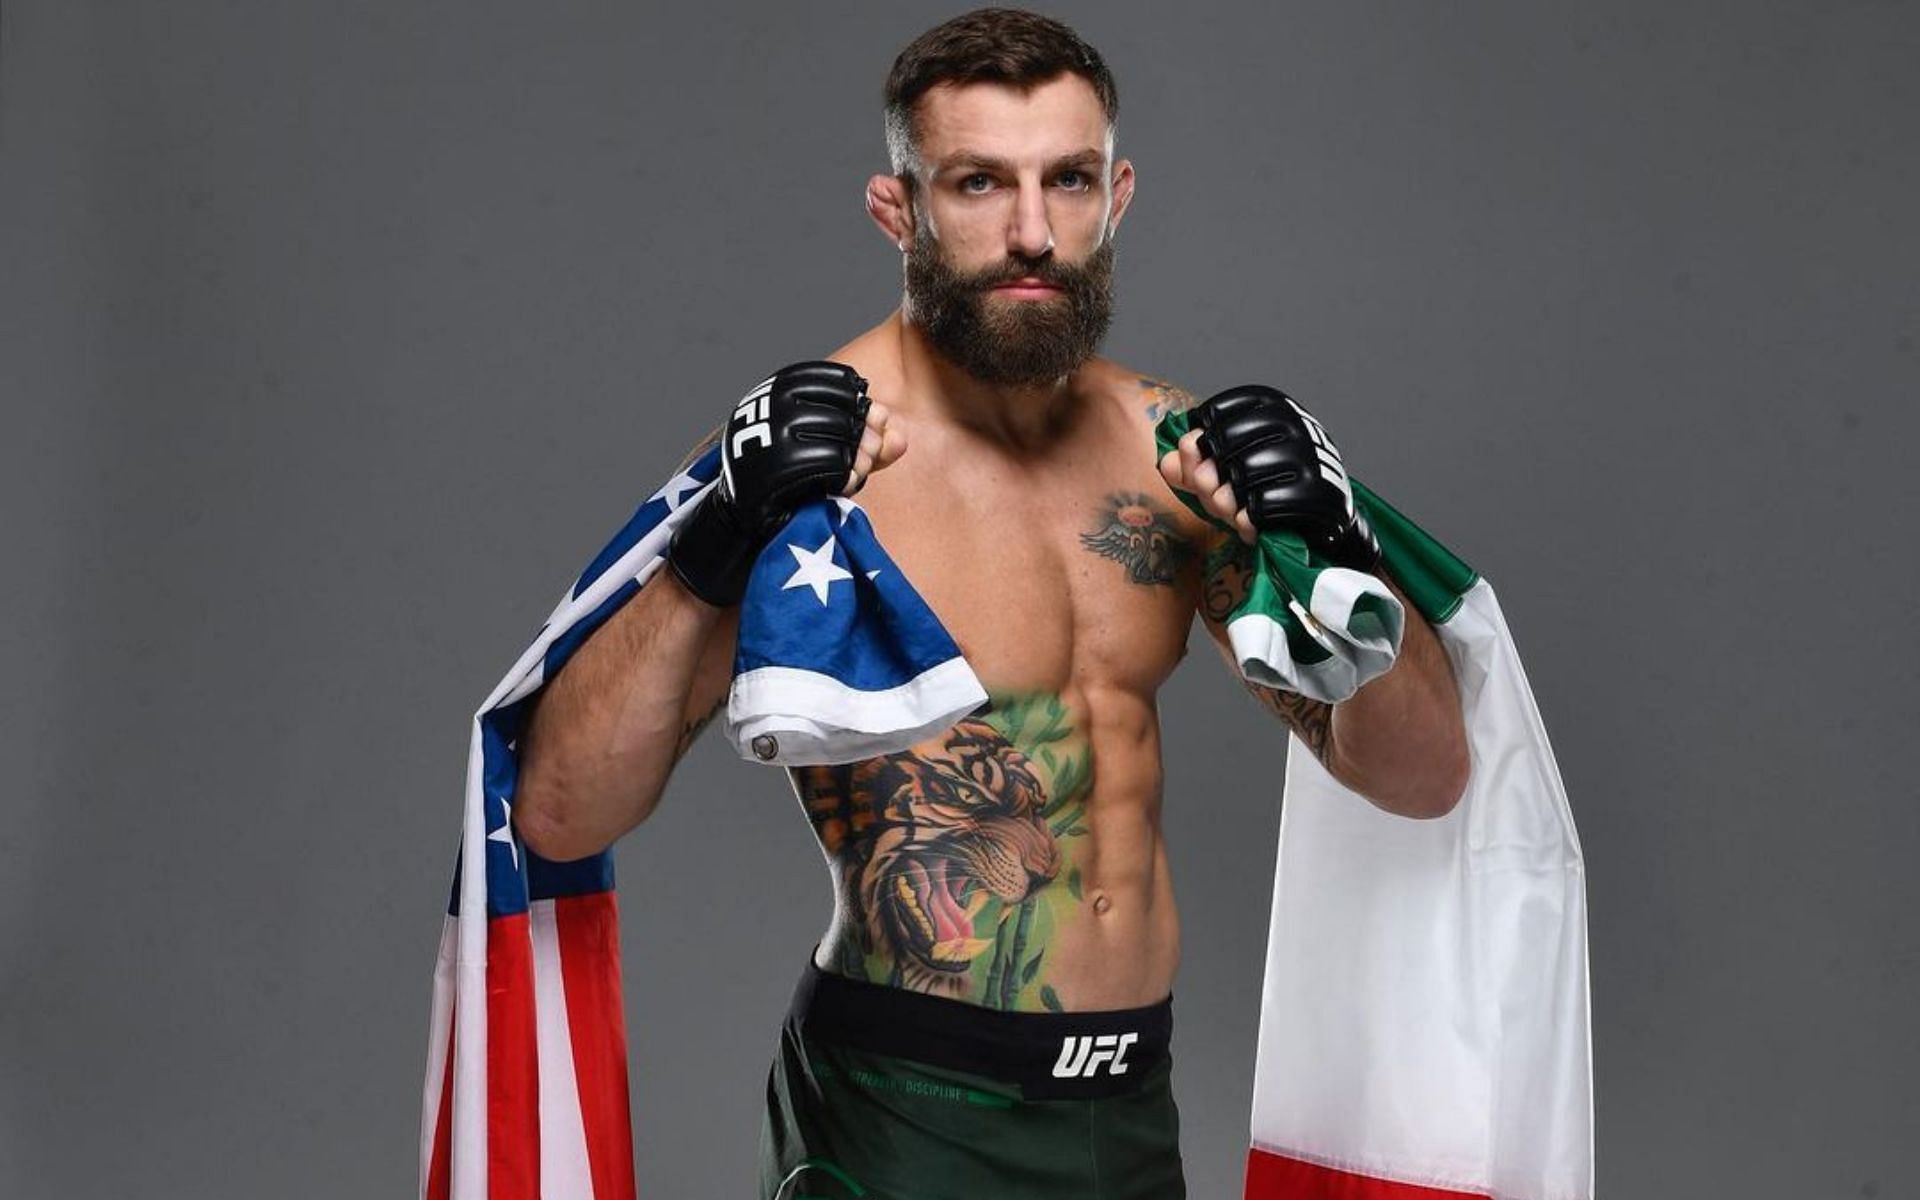 Michael Chiesa accused of turning down short-notice matchup for UFC 287 [Image courtesy: @mikemav22 on Instagram]